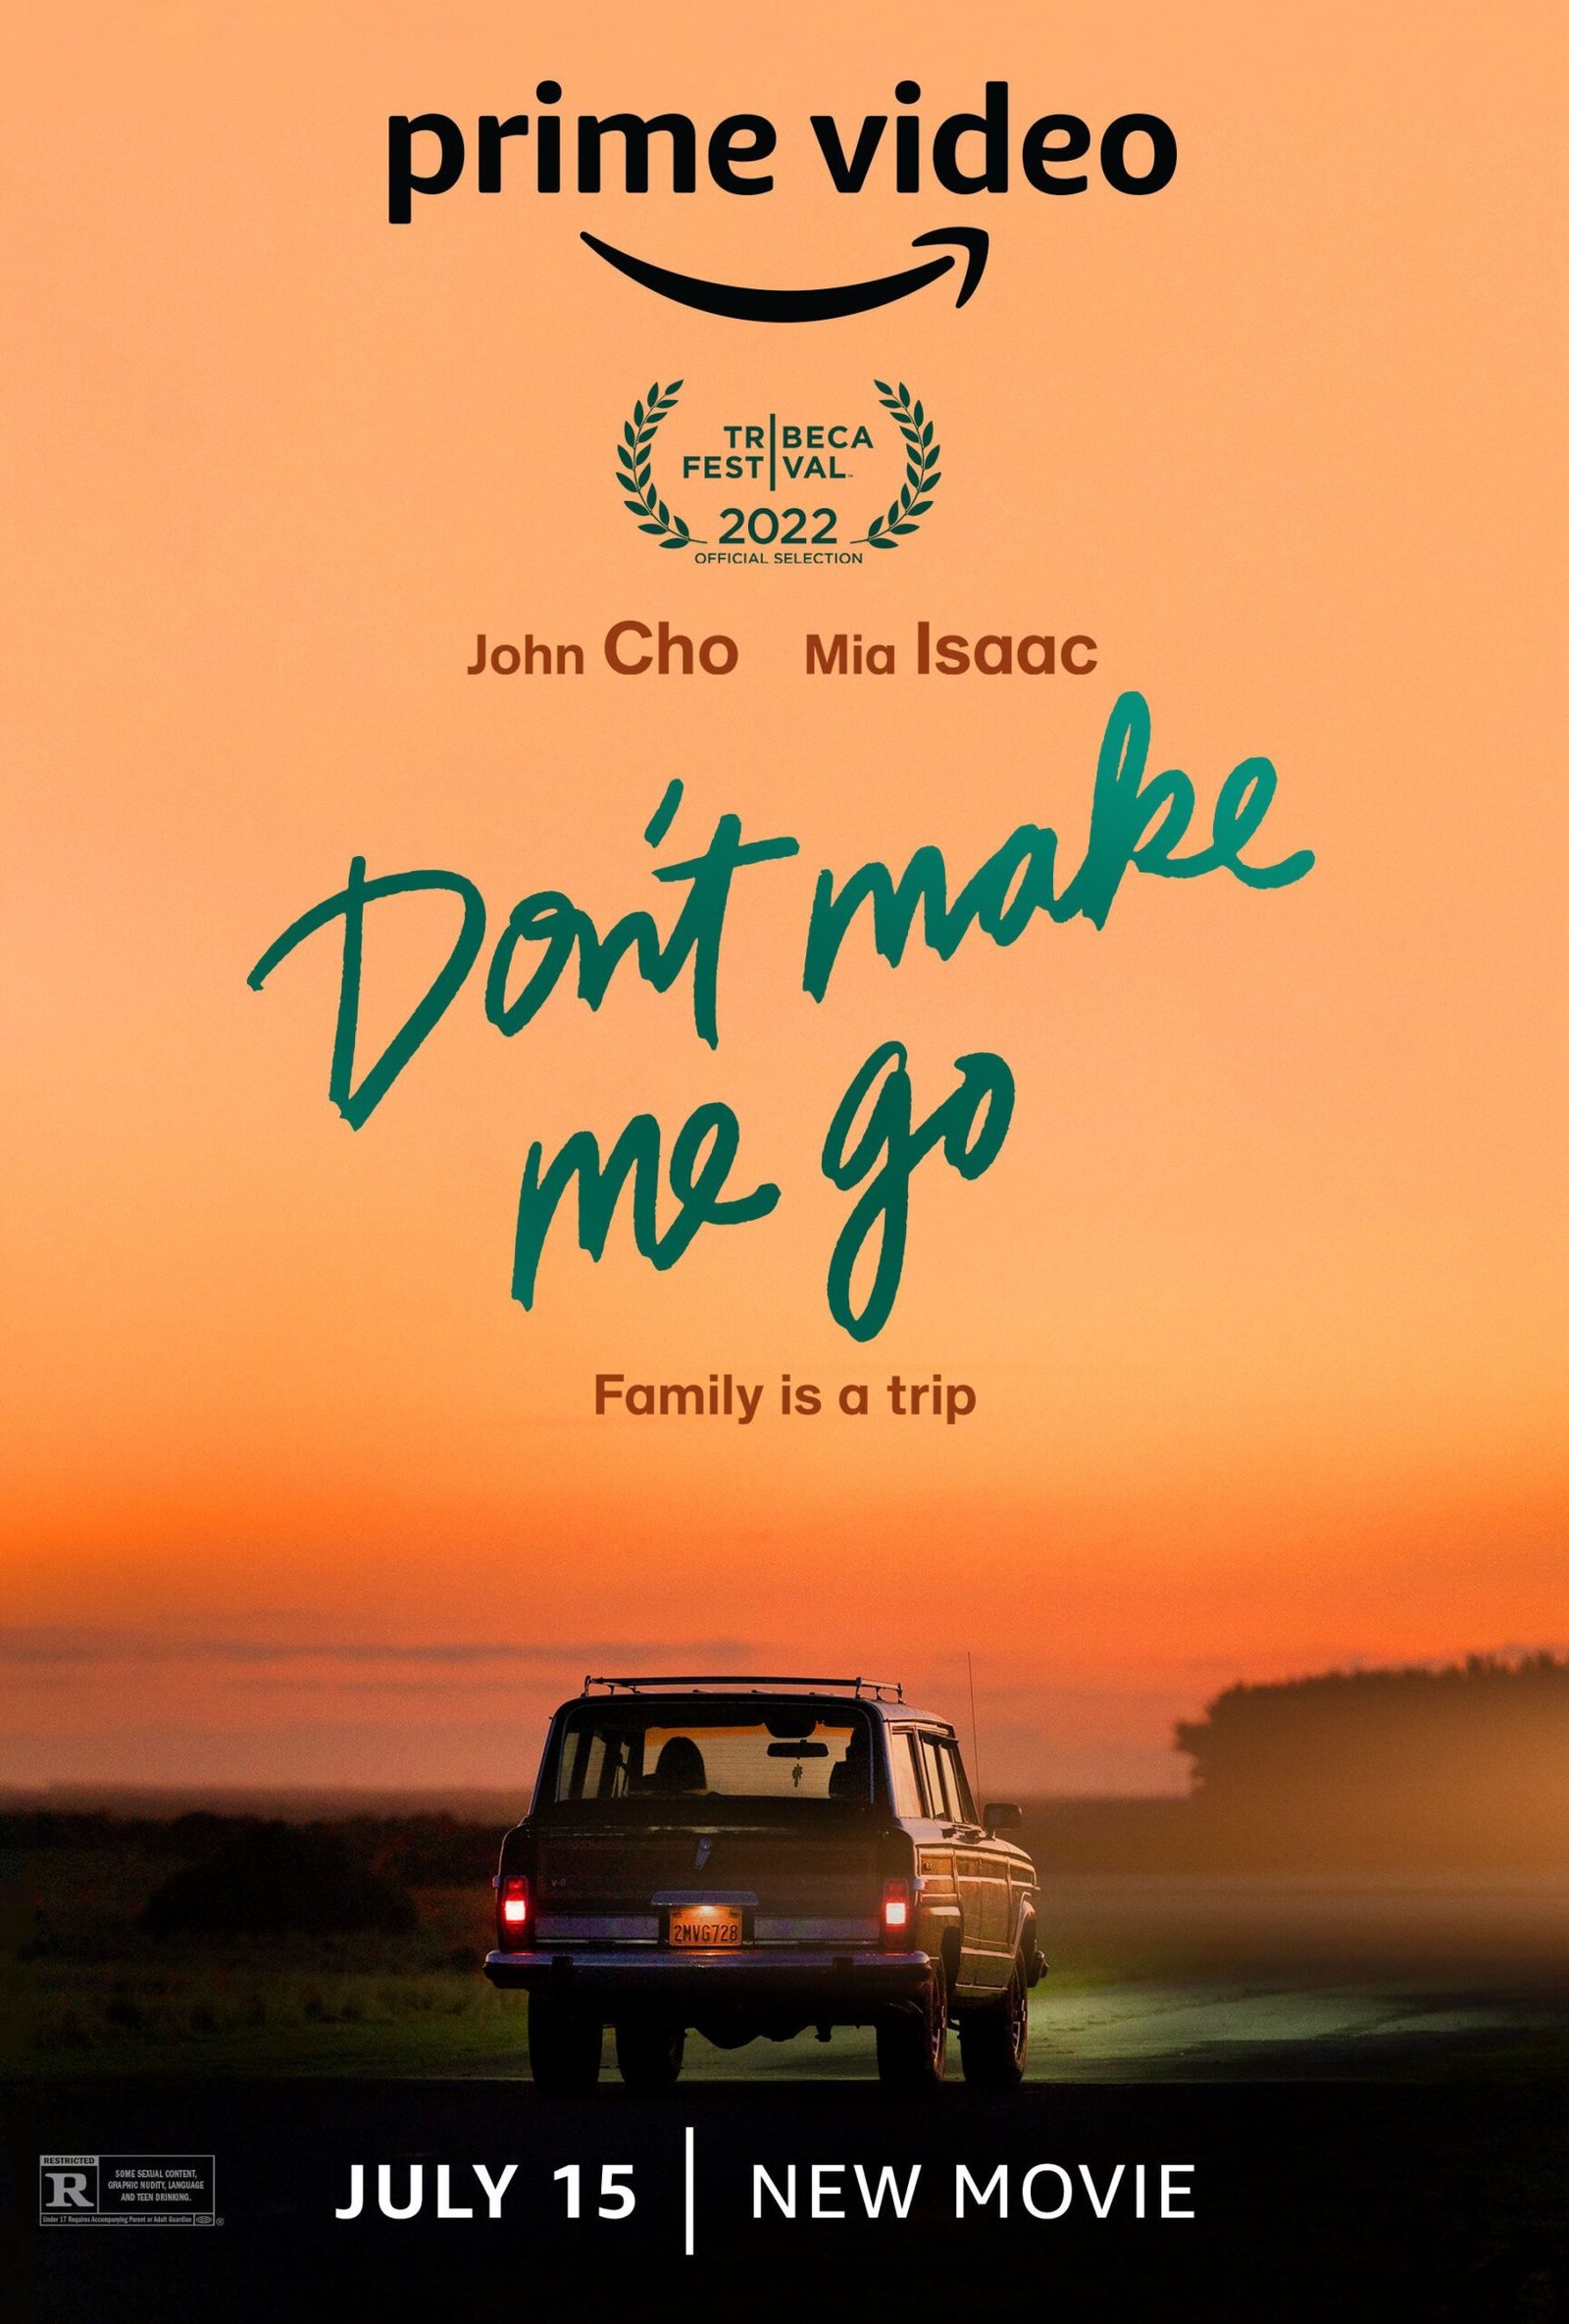 'Don't make me go': Trailer and release date of the Prime Video movie with John Cho and Mia Isaac • On your screen